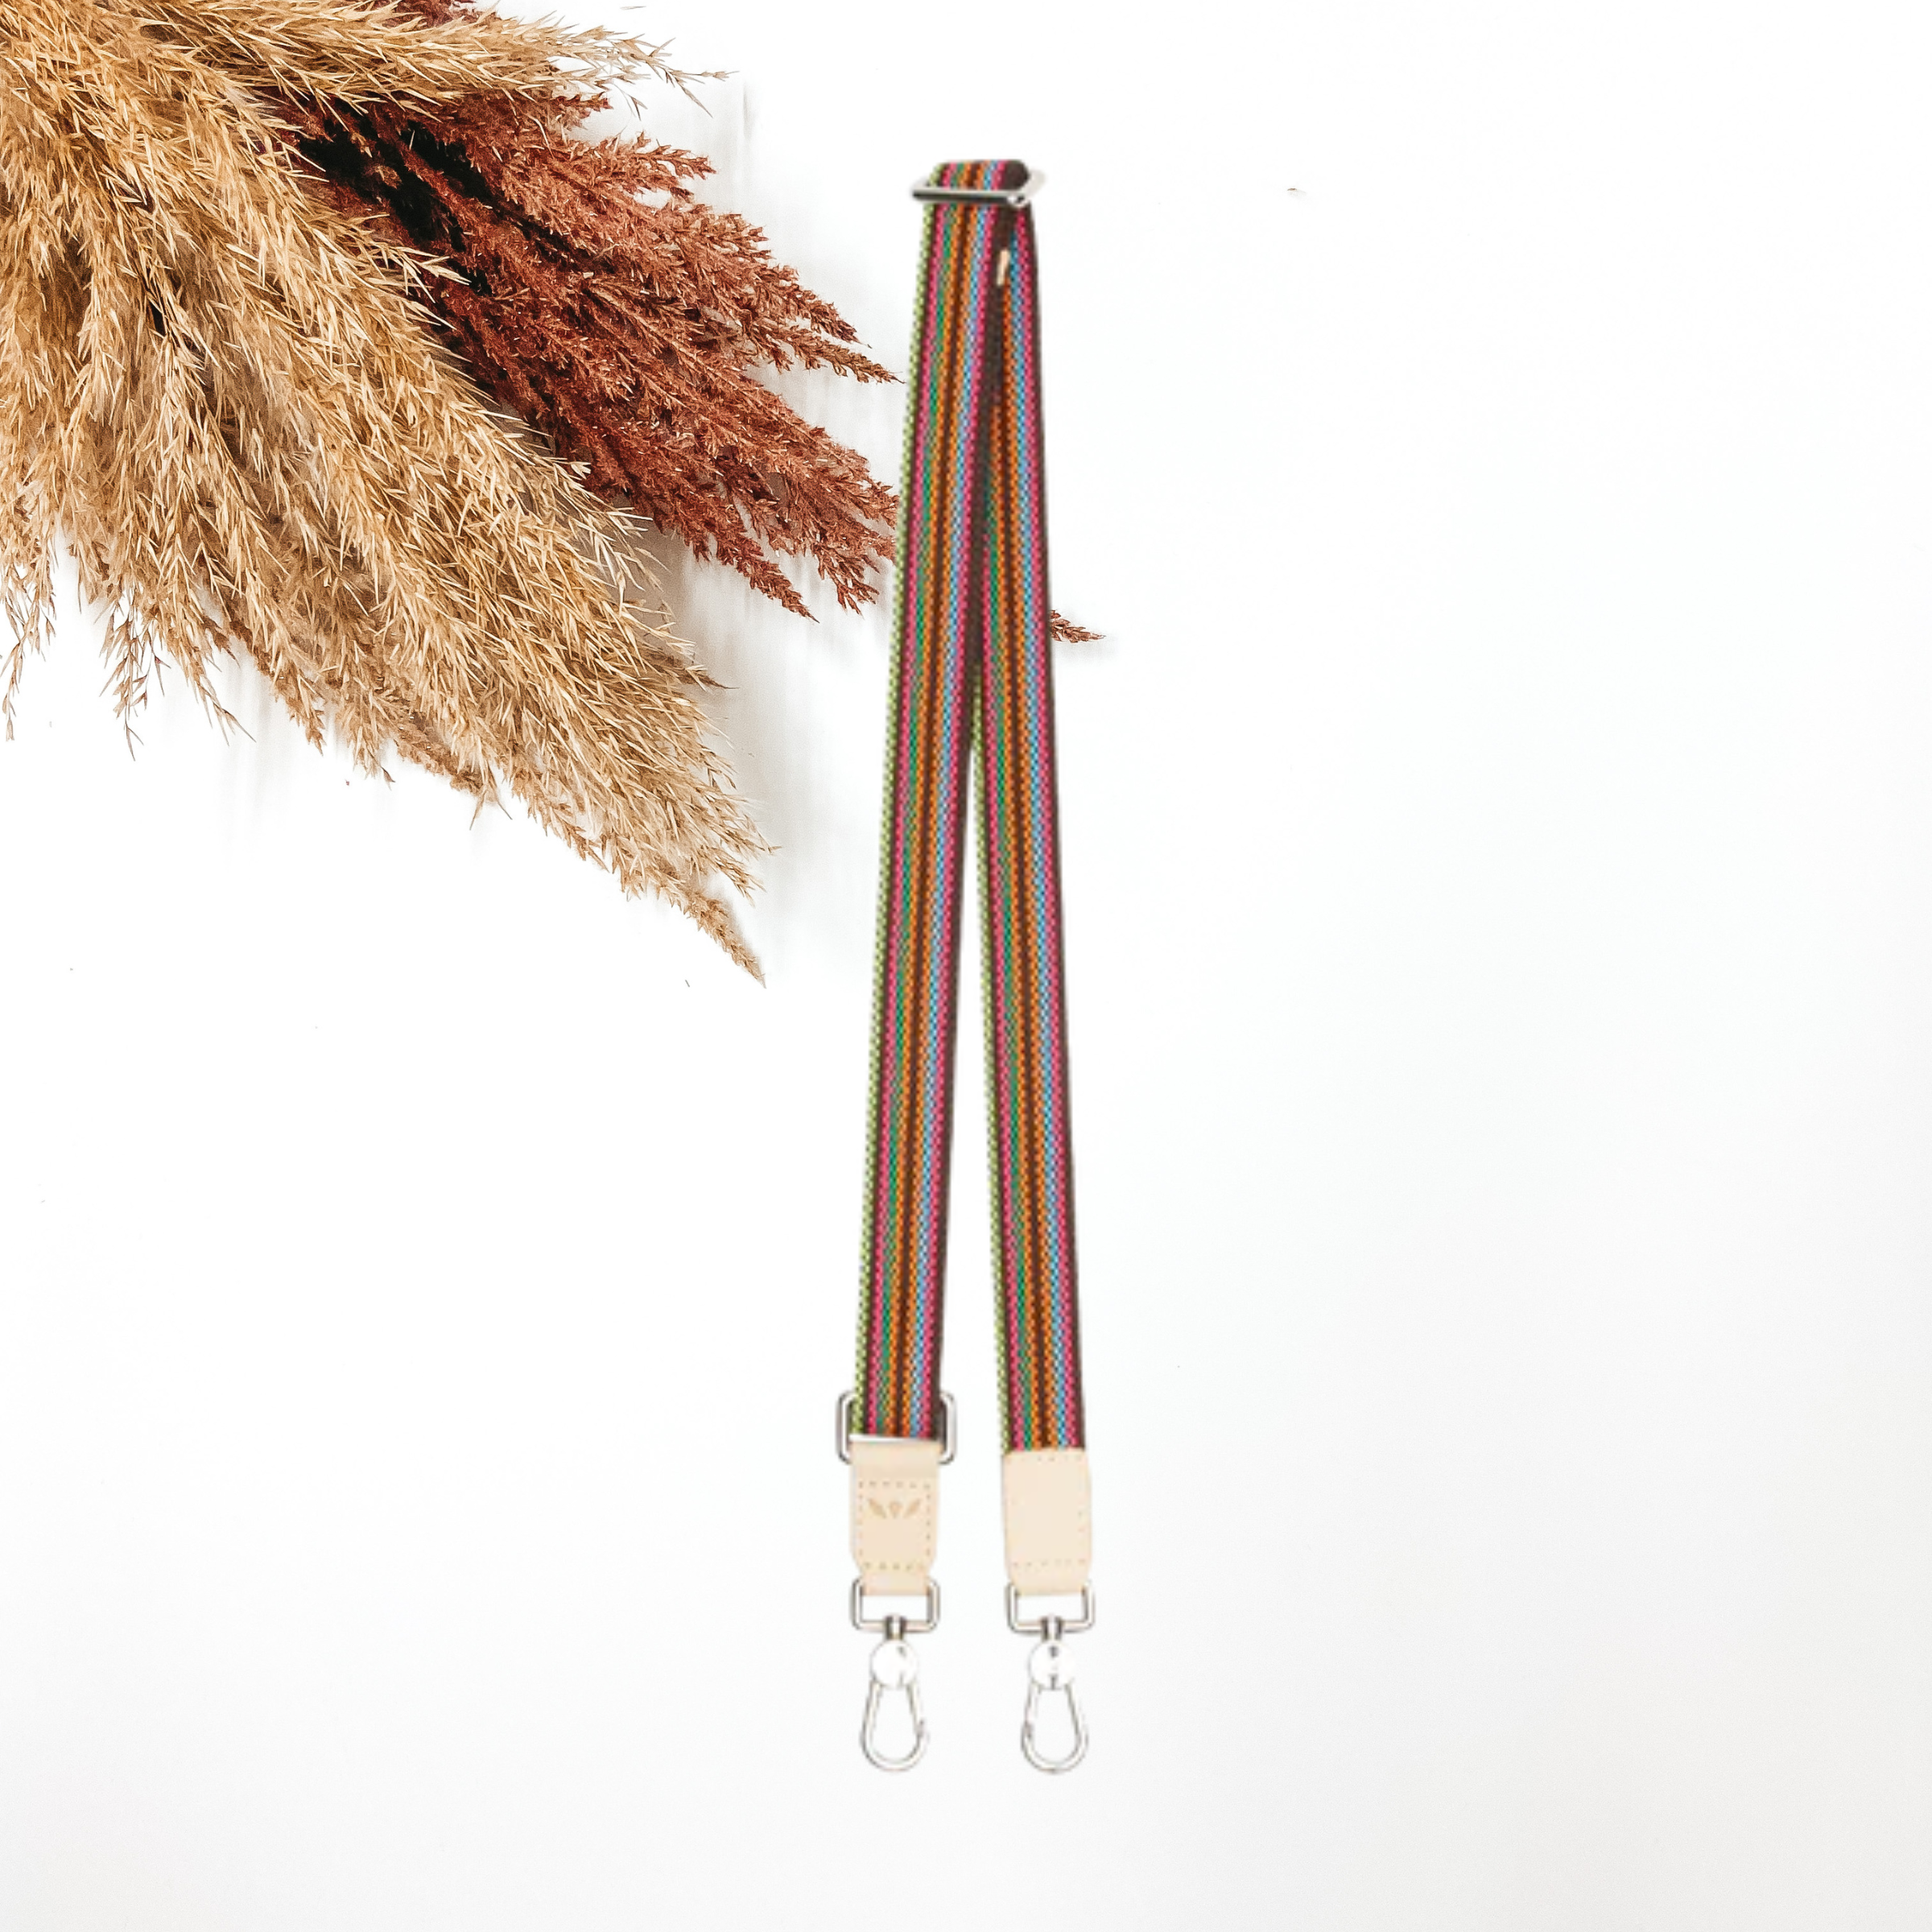 A woven multicolored purse strap that has a main color of brown. This purse strap is pictured on a white background with tan and brown pompous grass in the top left corner.